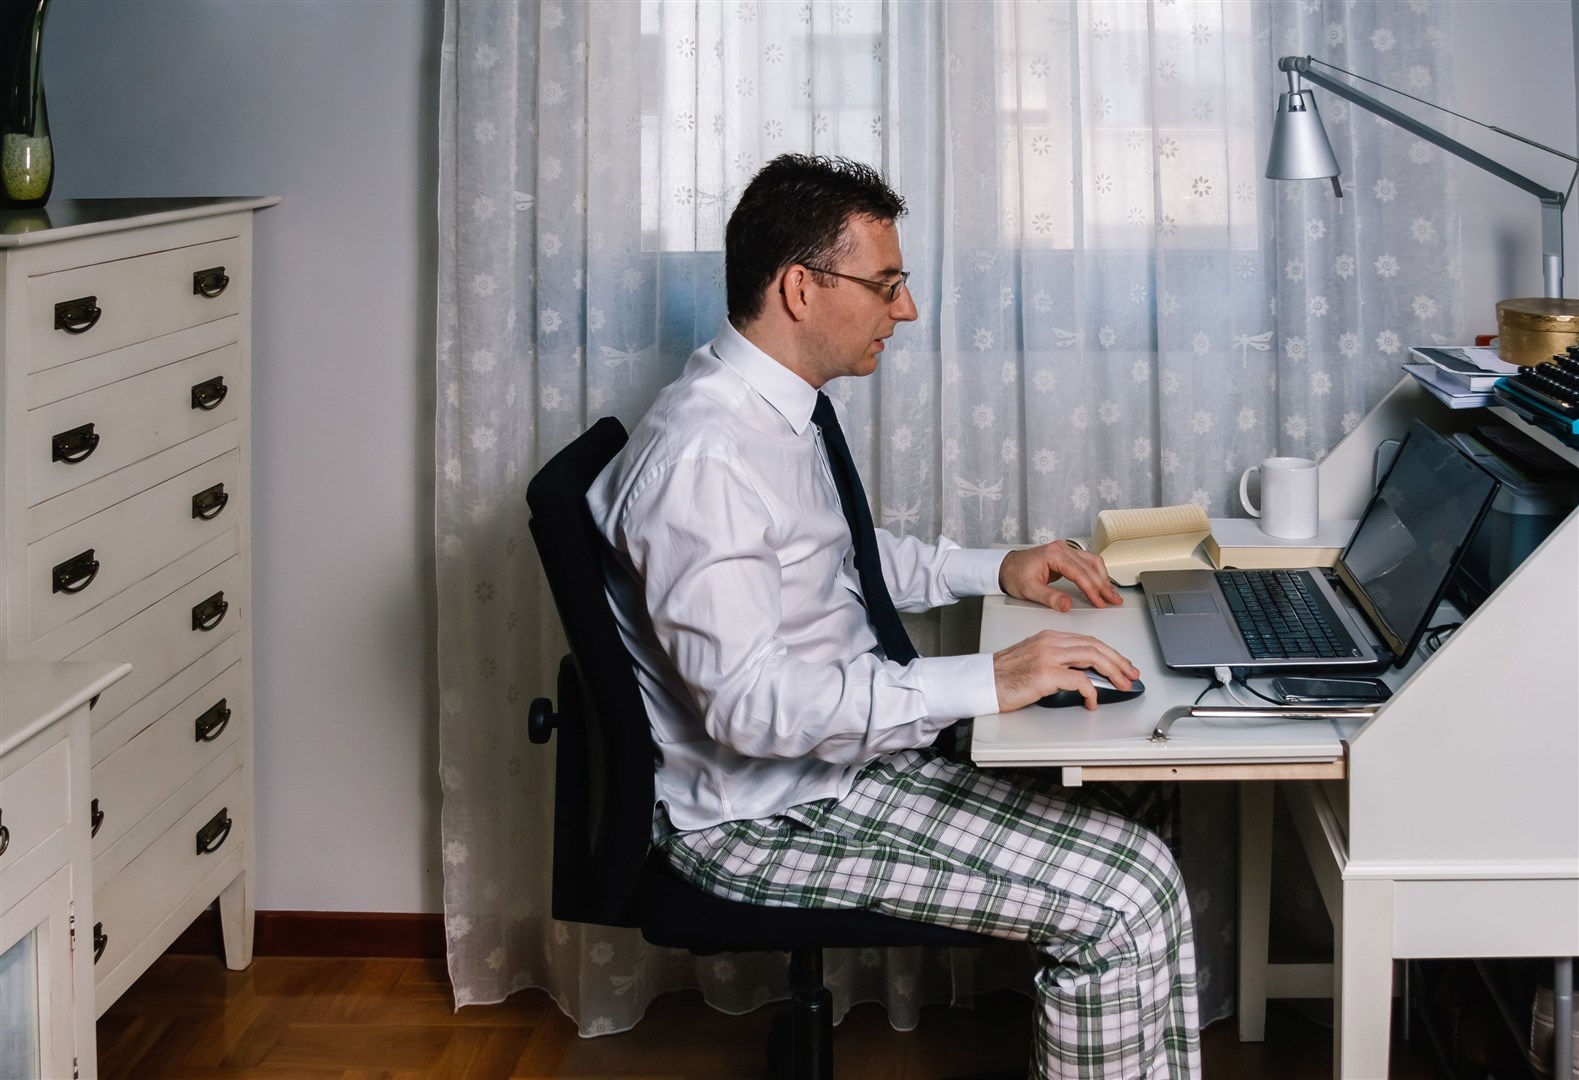 Man working from home with laptop wearing shirt, tie and pajama pants